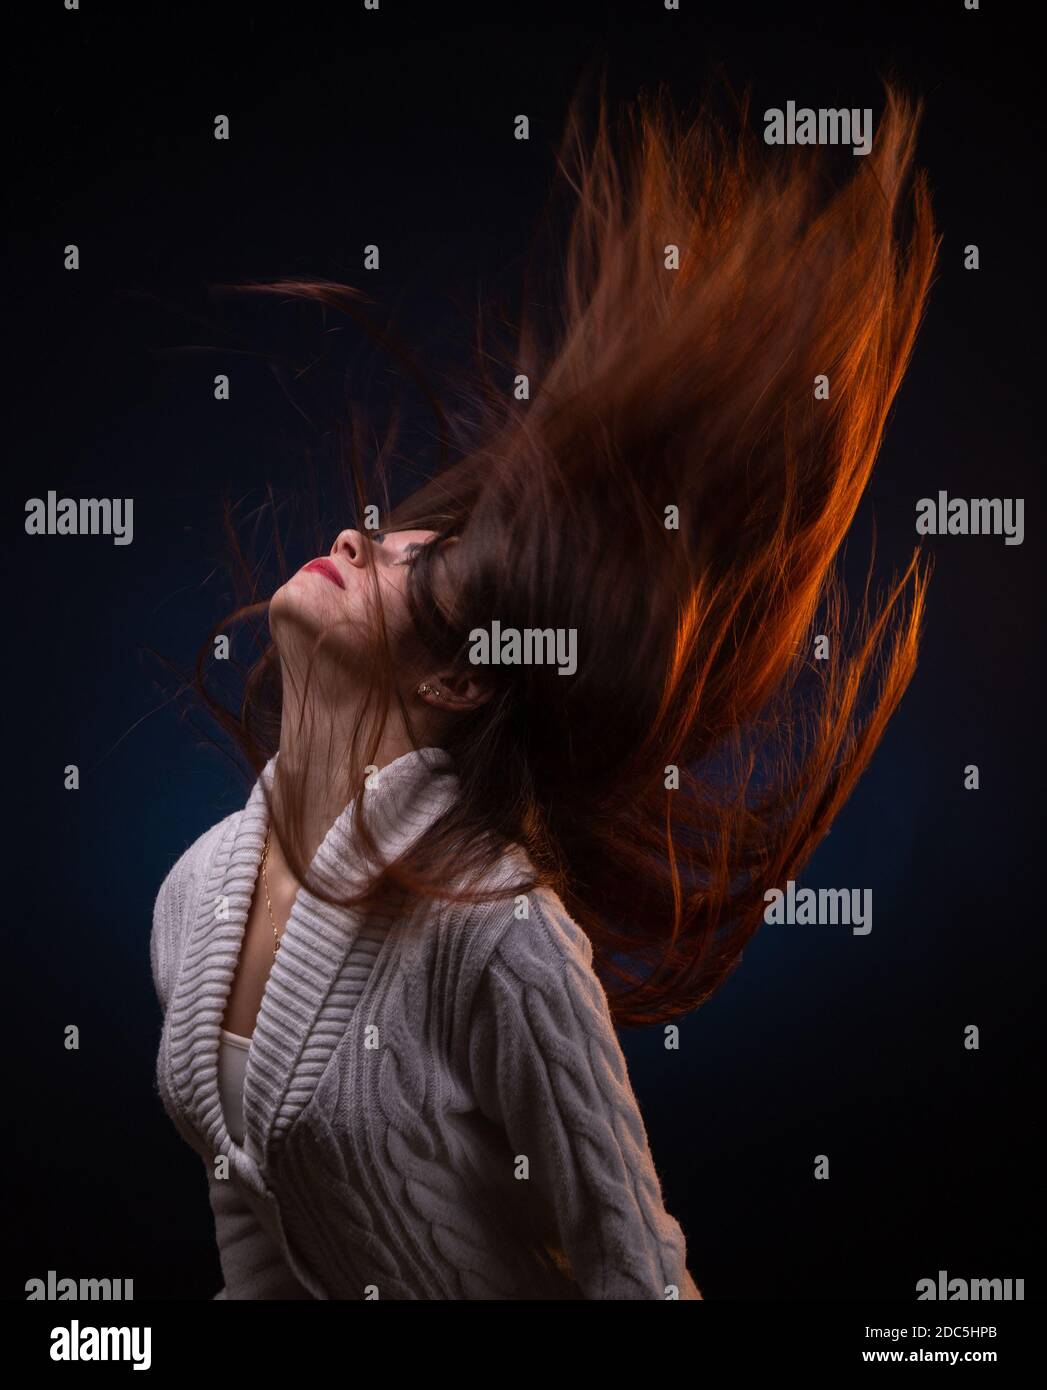 Photo of brunette young woman shaking long hair Stock Photo - Alamy